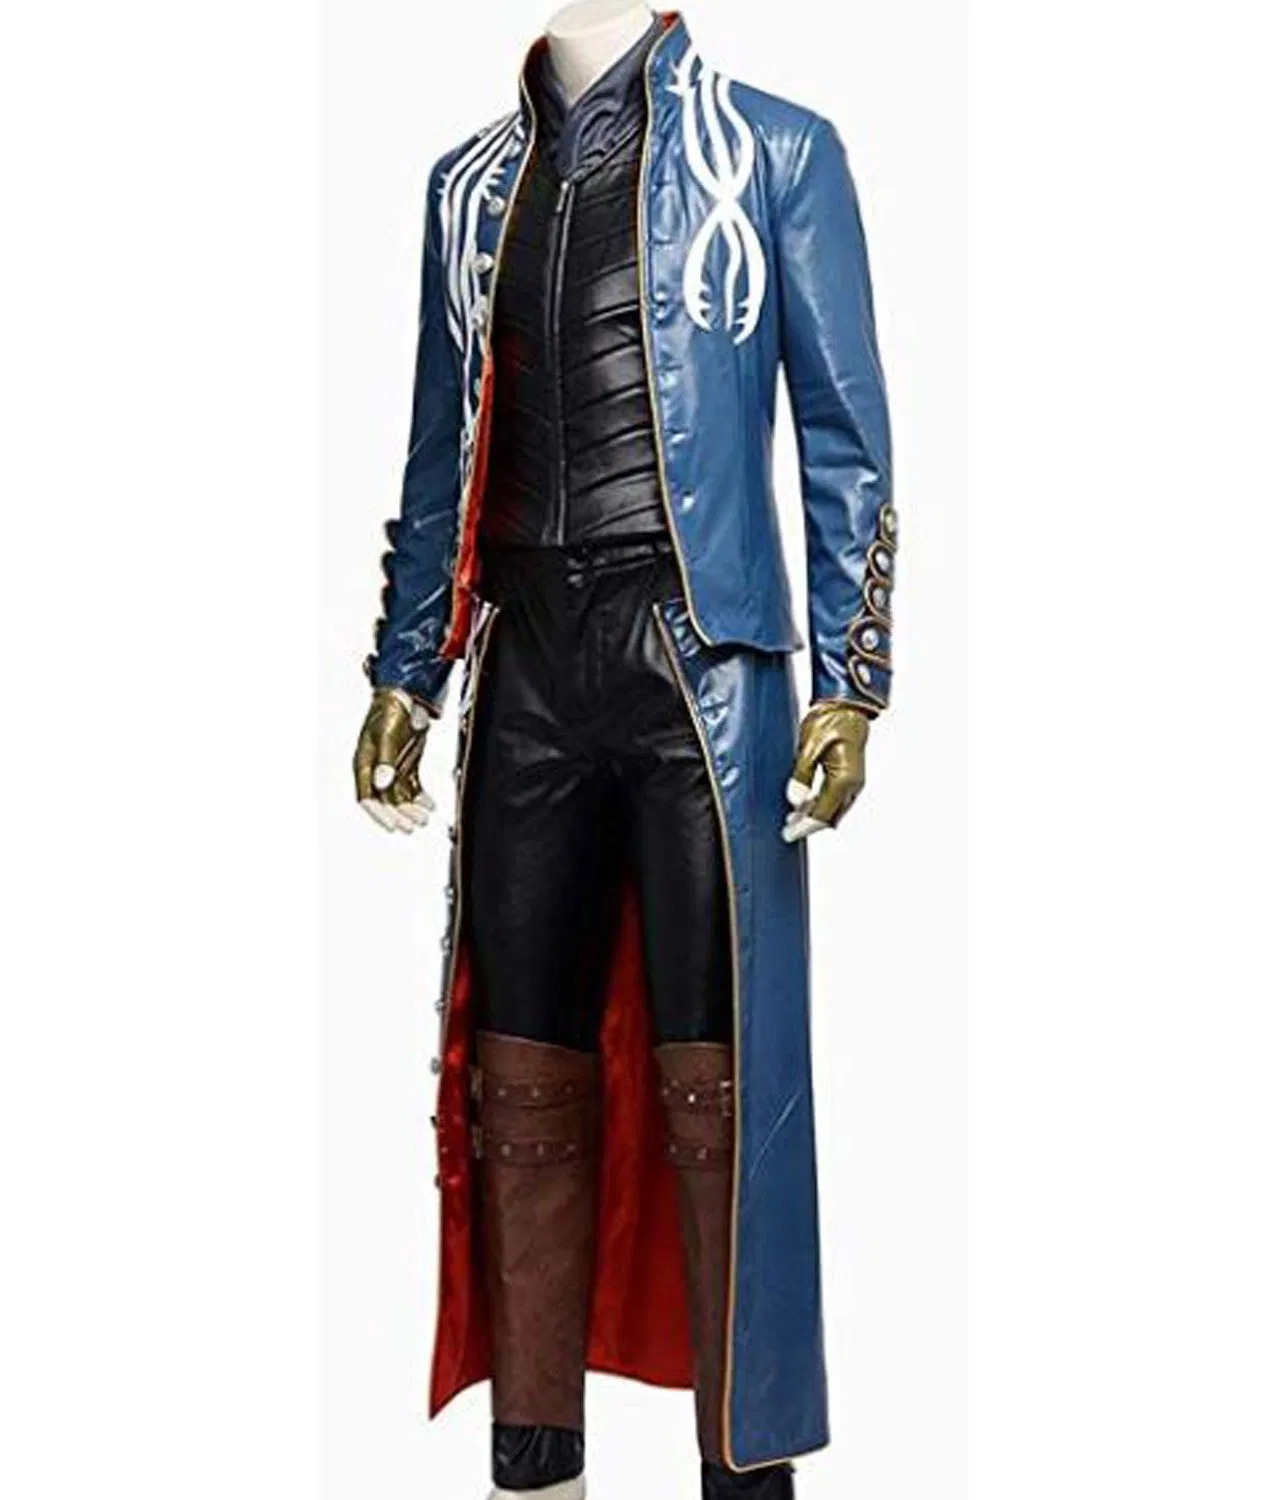 Vergil Coat  Devil May Cry 3 Leather Coat